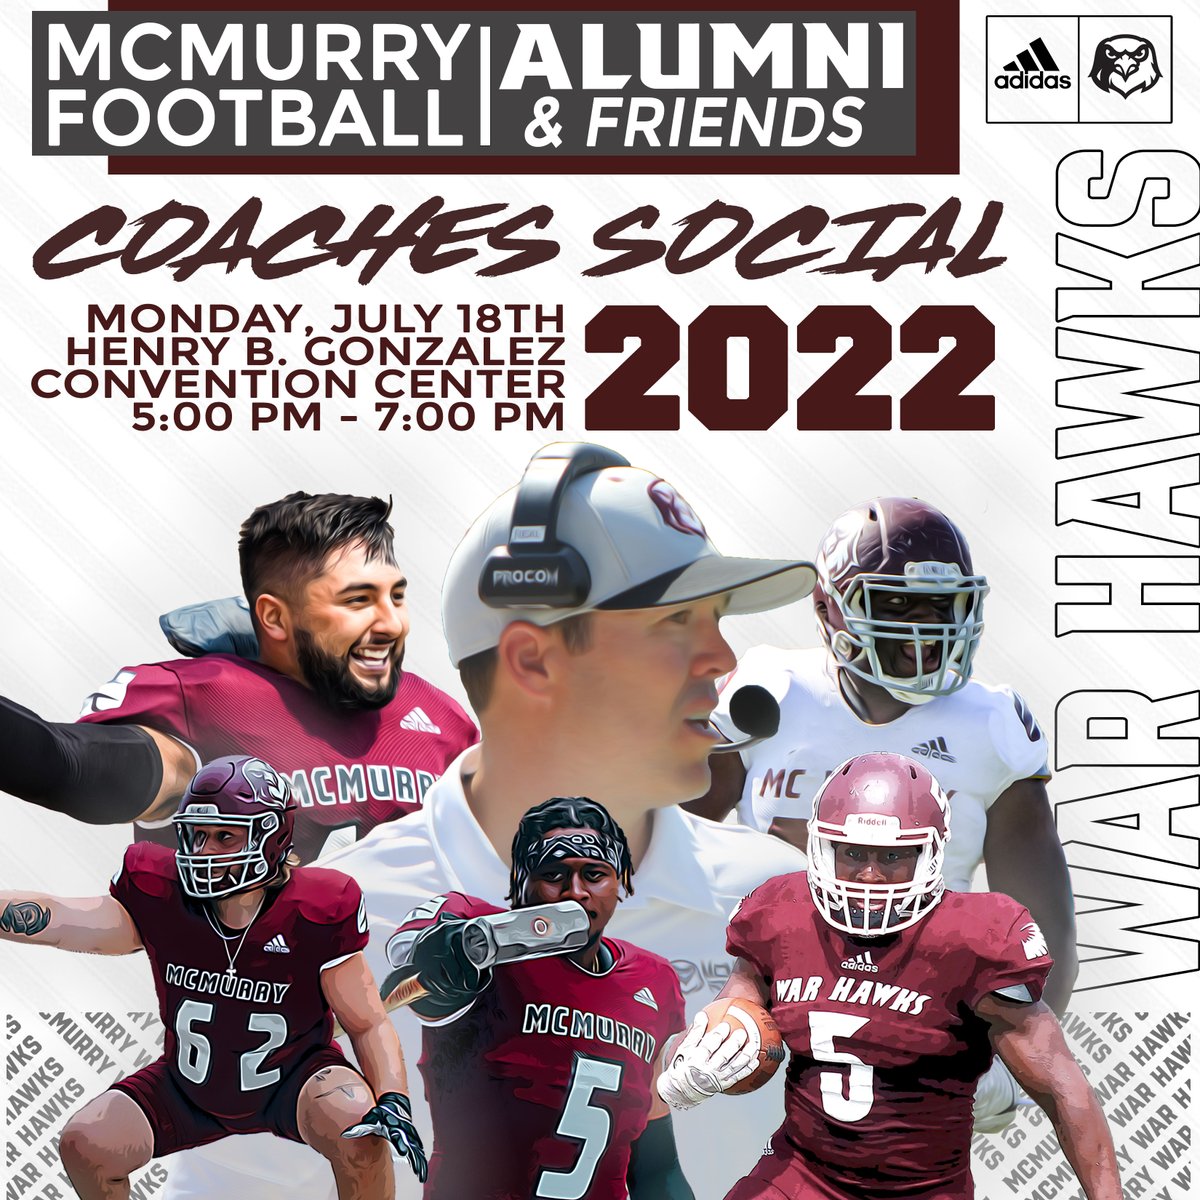 In just a few weeks at the THSCA Convention in San Antonio, we invite all McMurry Football Alumni & Friends to join the War Hawks Staff for our annual social at the Gonzalez Convention Center Room #205. #WarHawksFAW